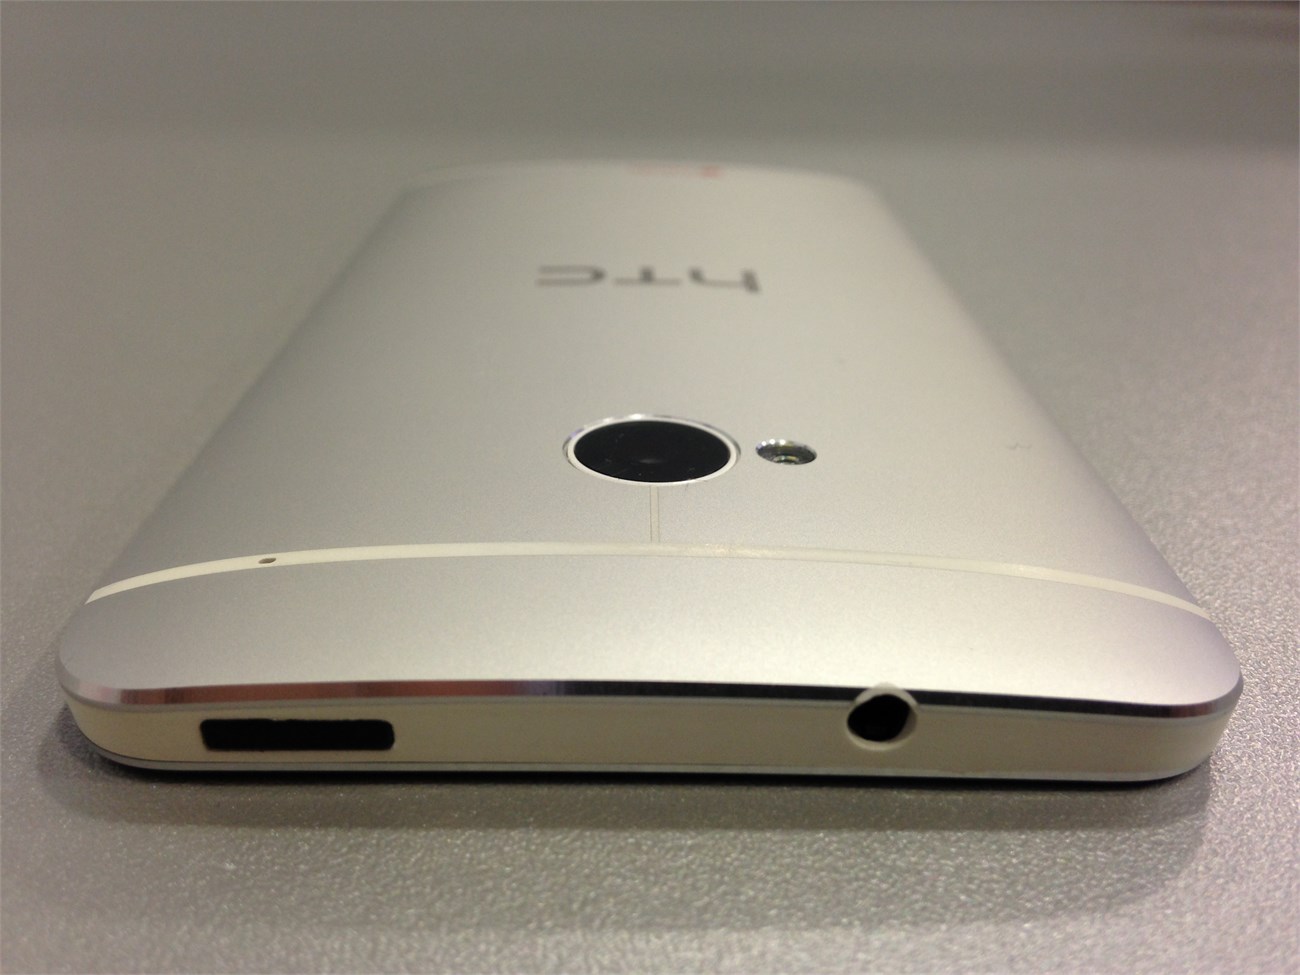 HTC adds new functionalities to the Dot View Case for One M8 on Windows